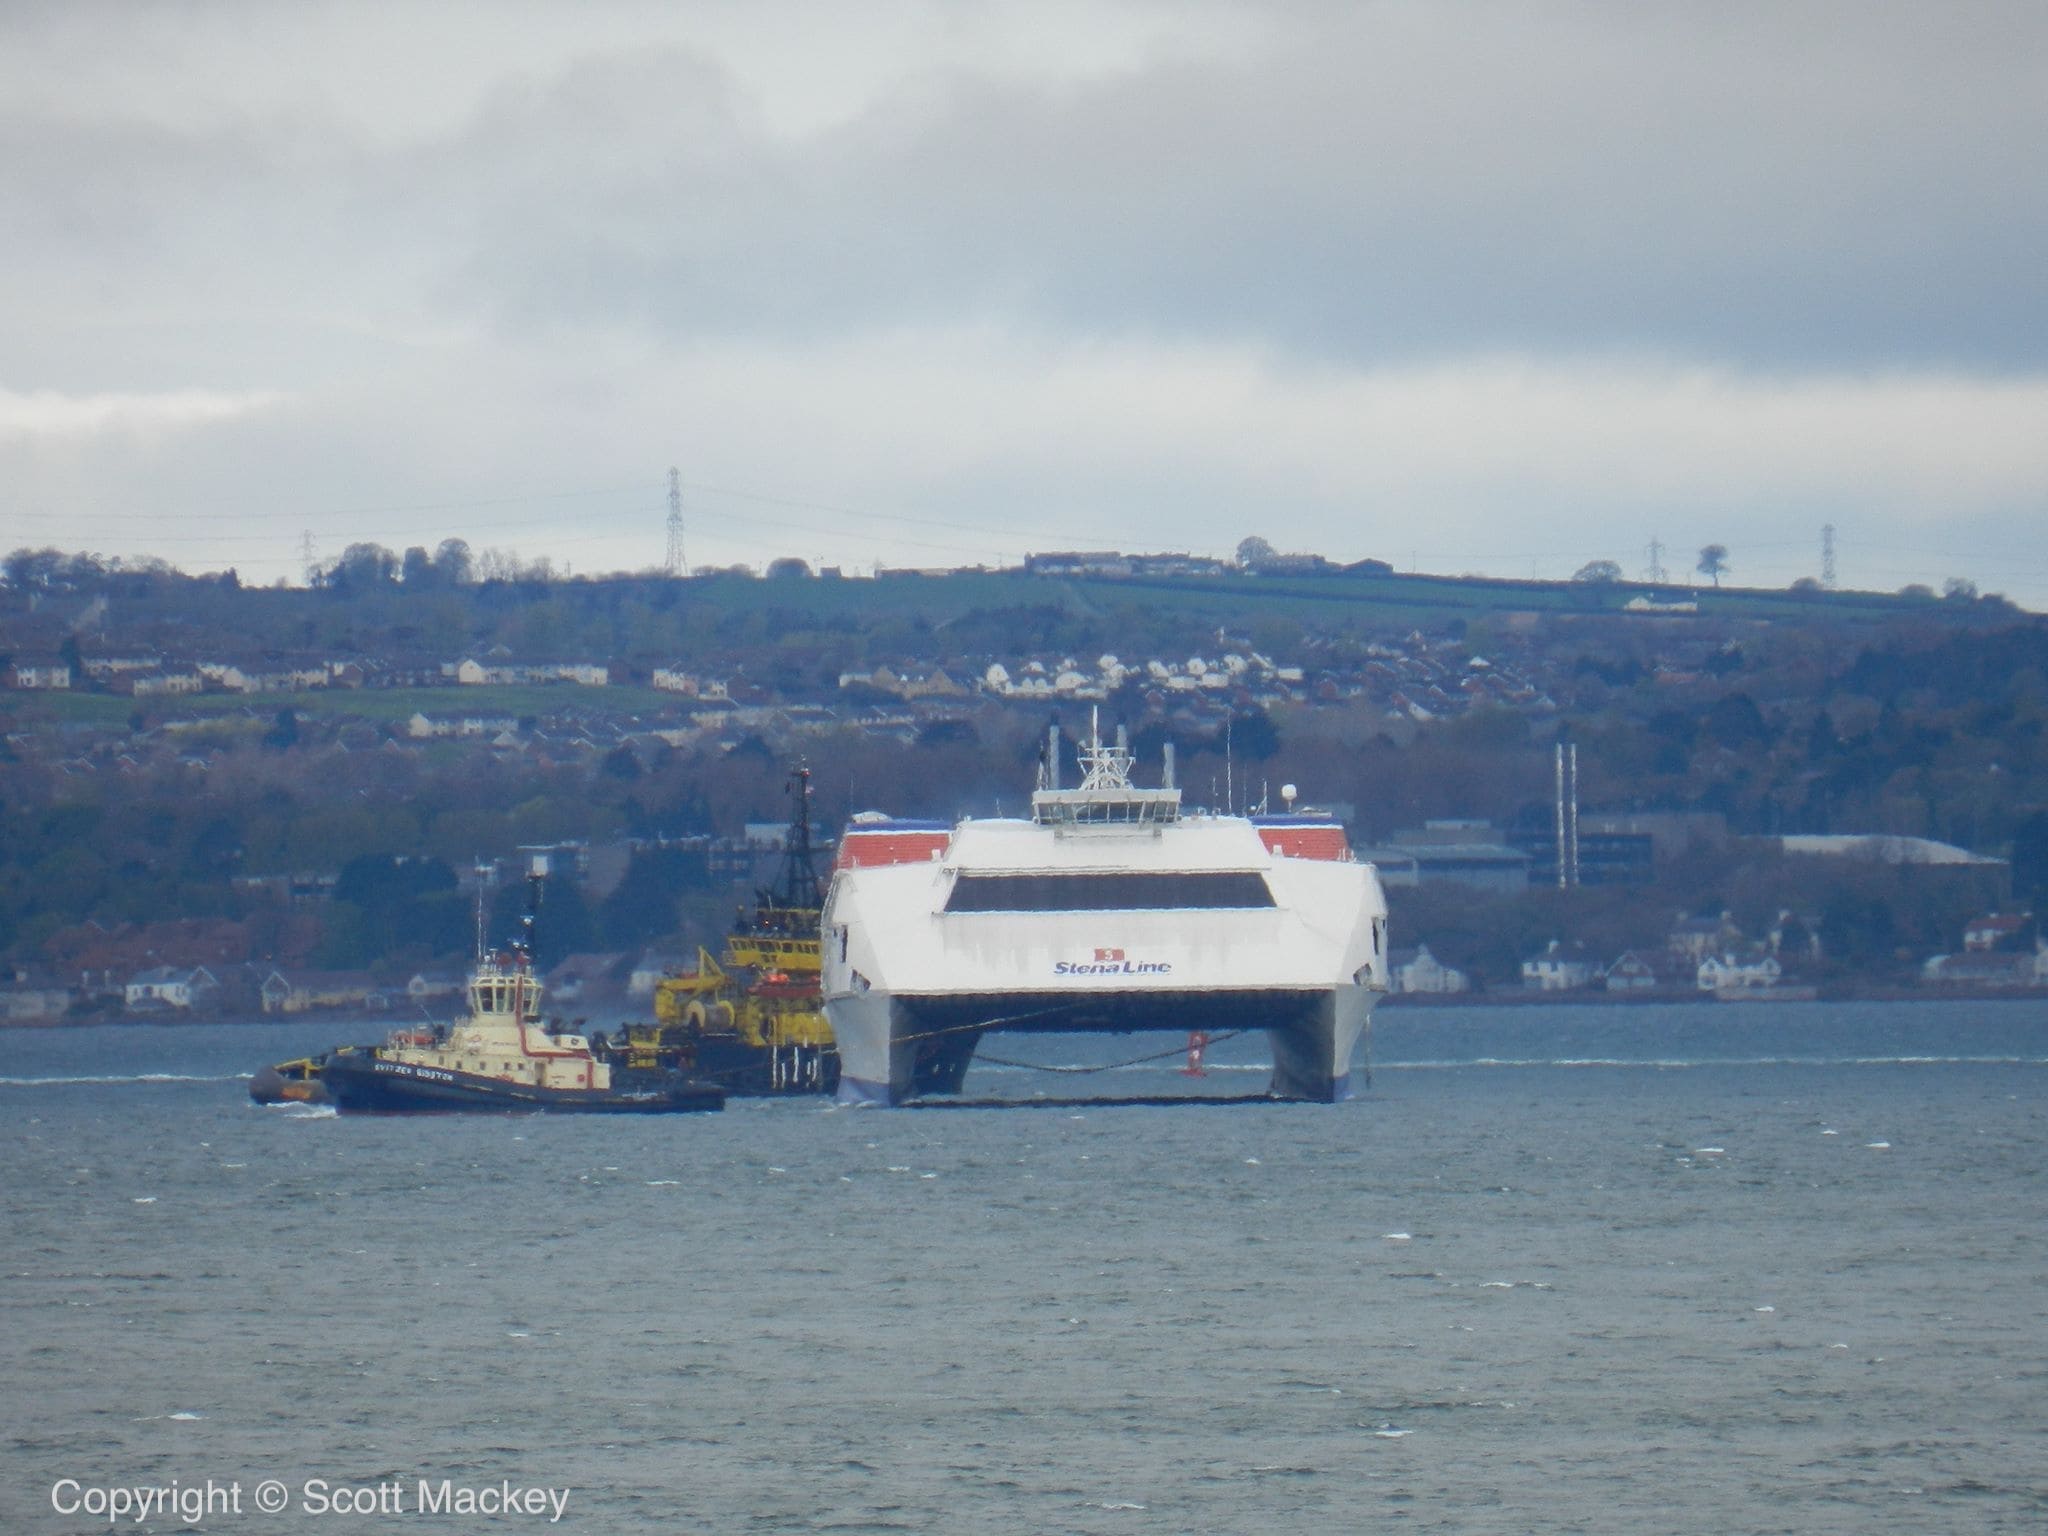 HSS STENA VOYAGER being towed from Belfast by the tug AGAT. Copyright © Scott Mackey.